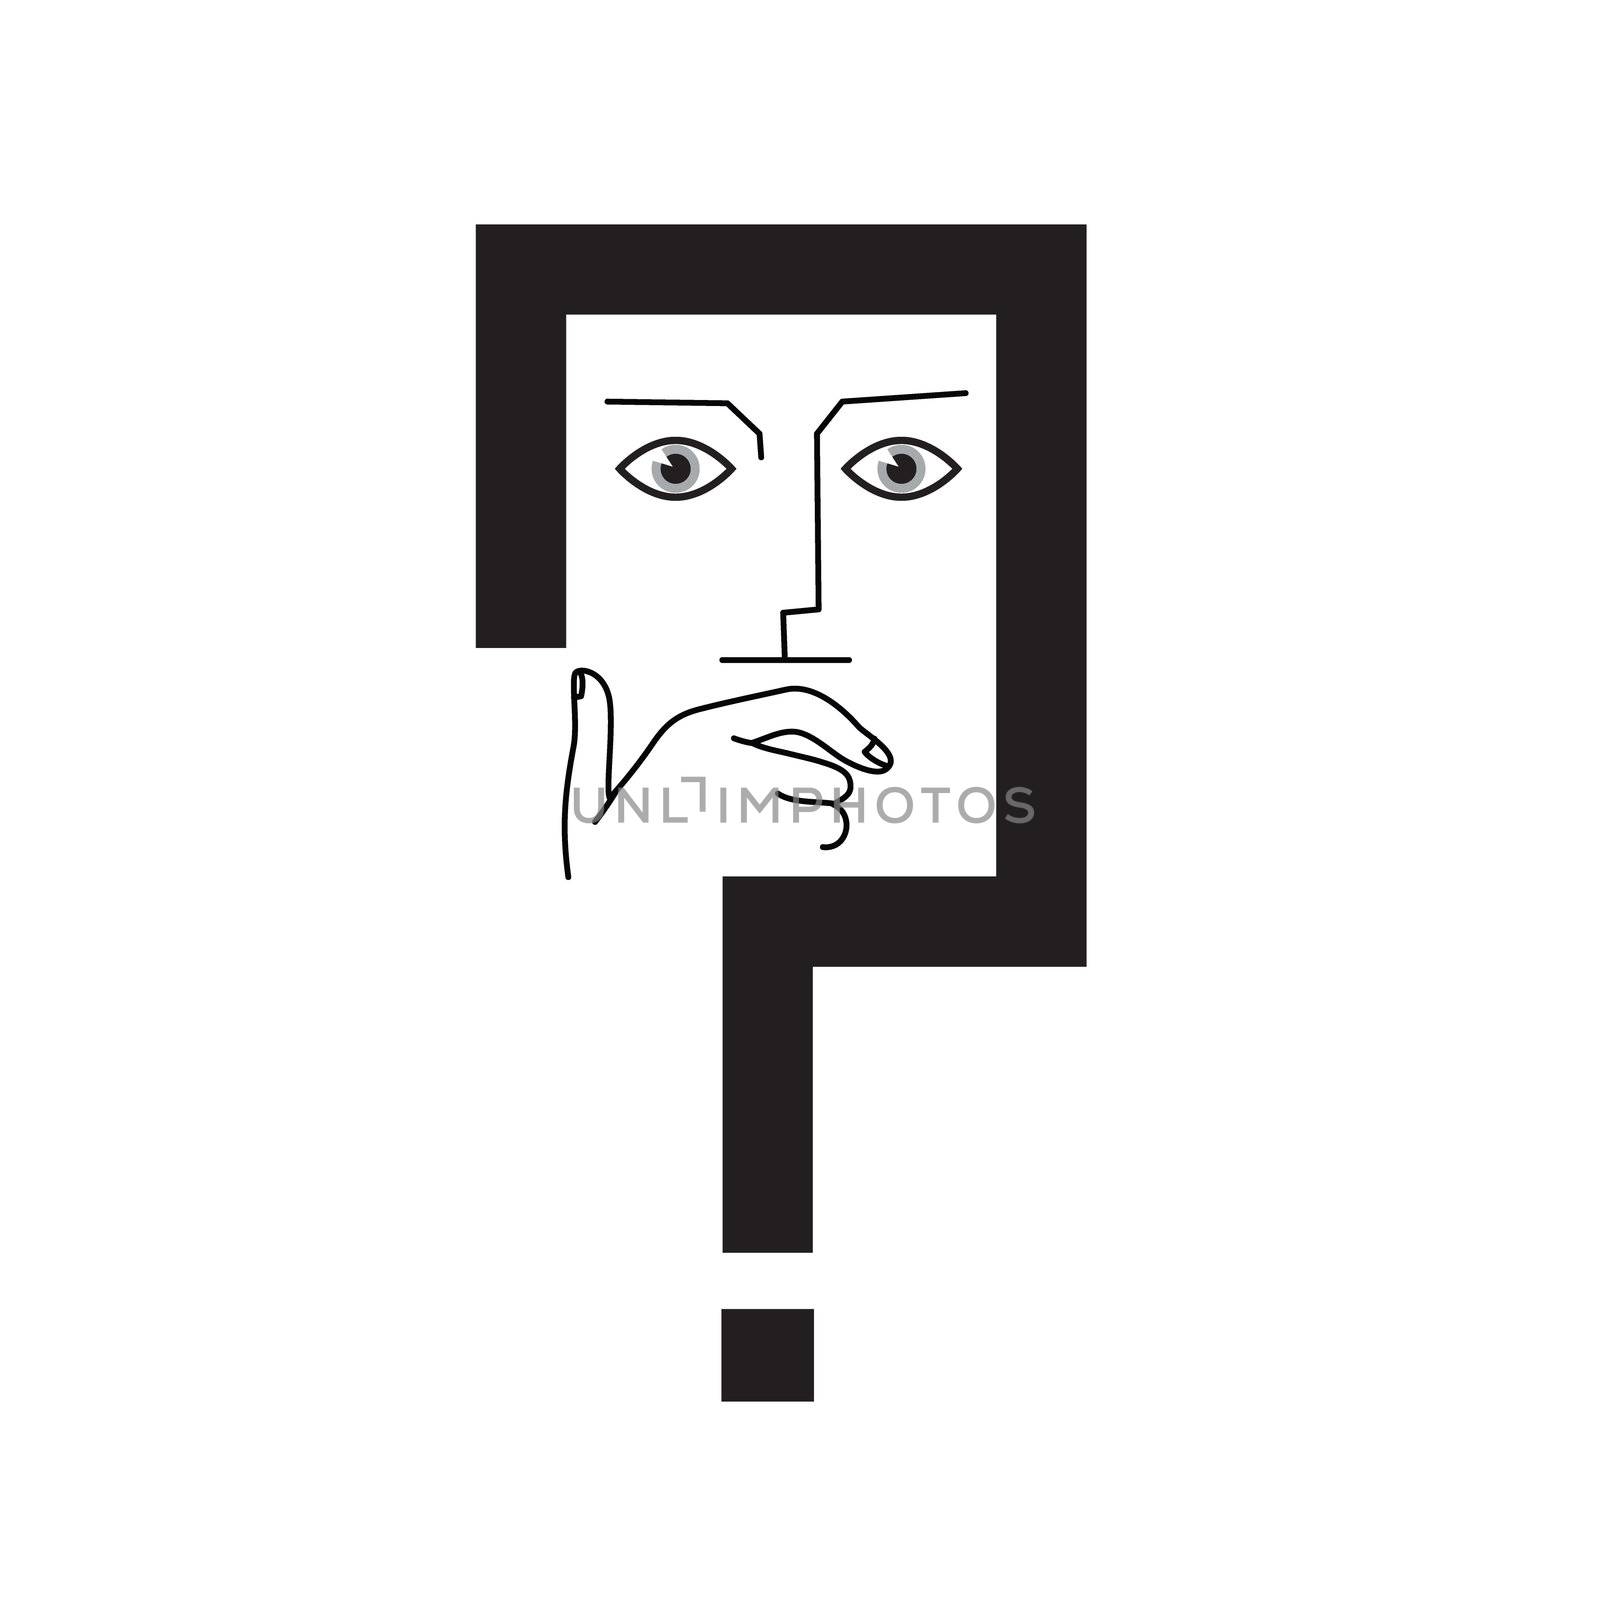 Thinker. The man's face in the frame of the question mark. Conceptual illustration. Vector.